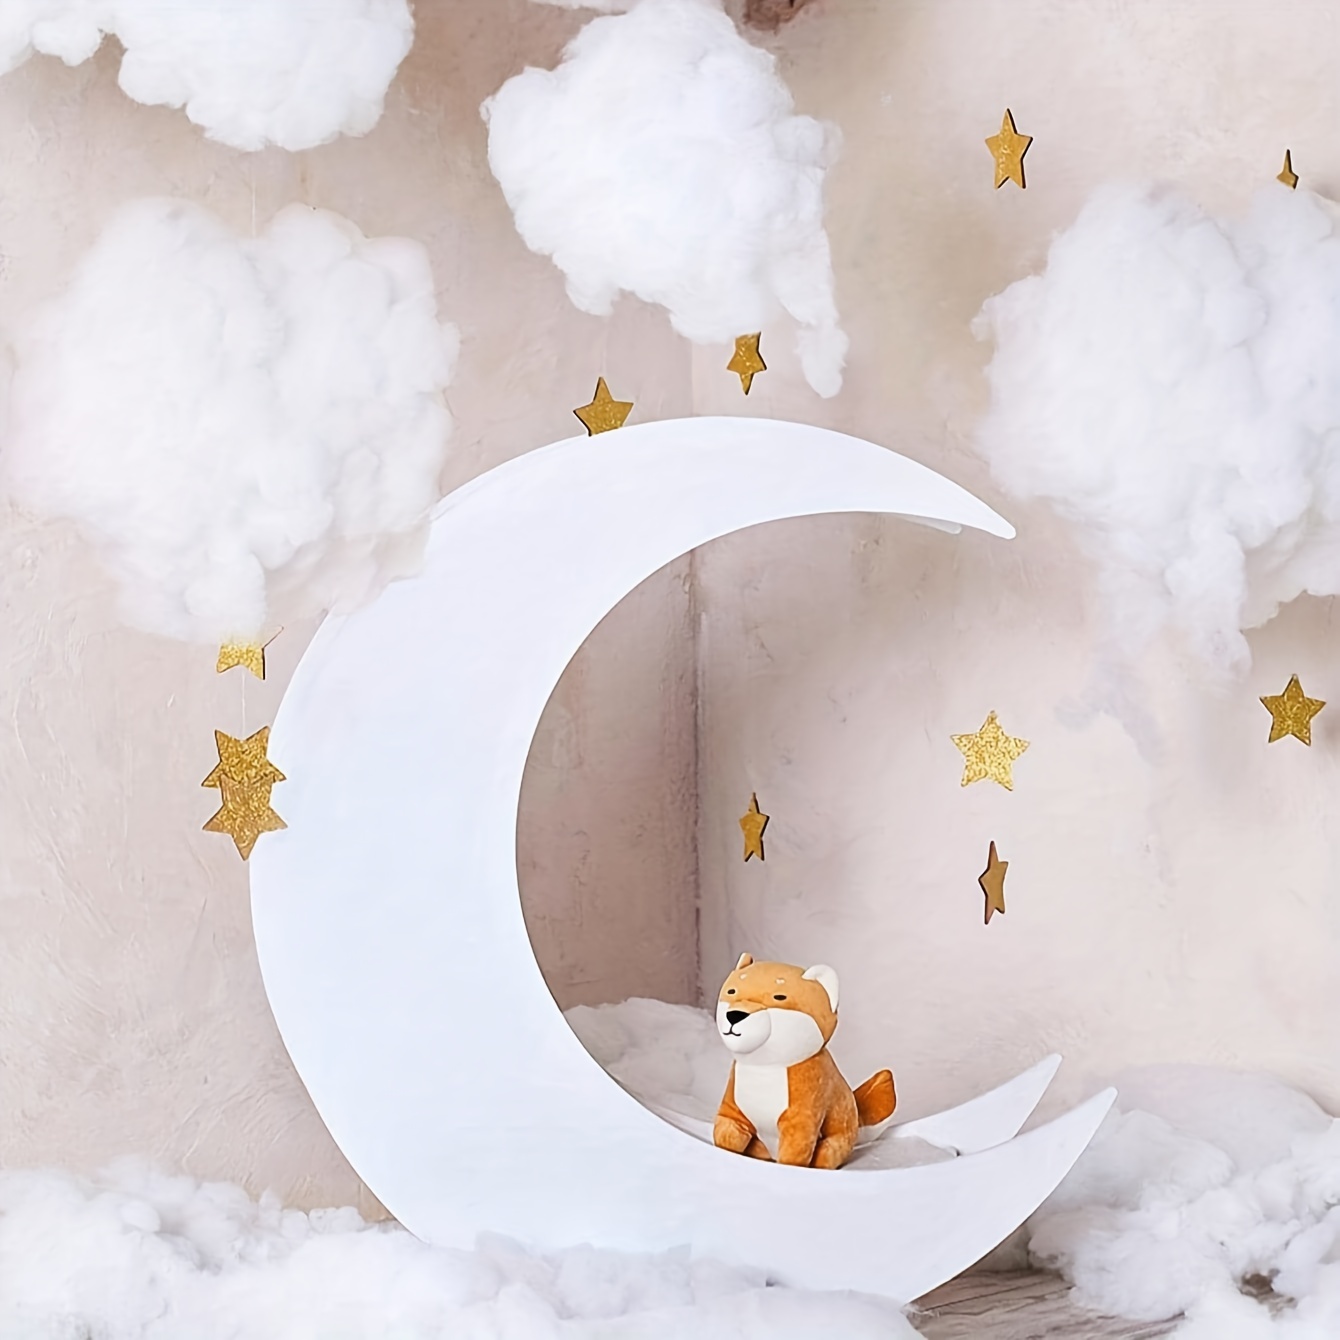 Large Artificial Cotton Clouds Decoration for Kids Ceiling Interior